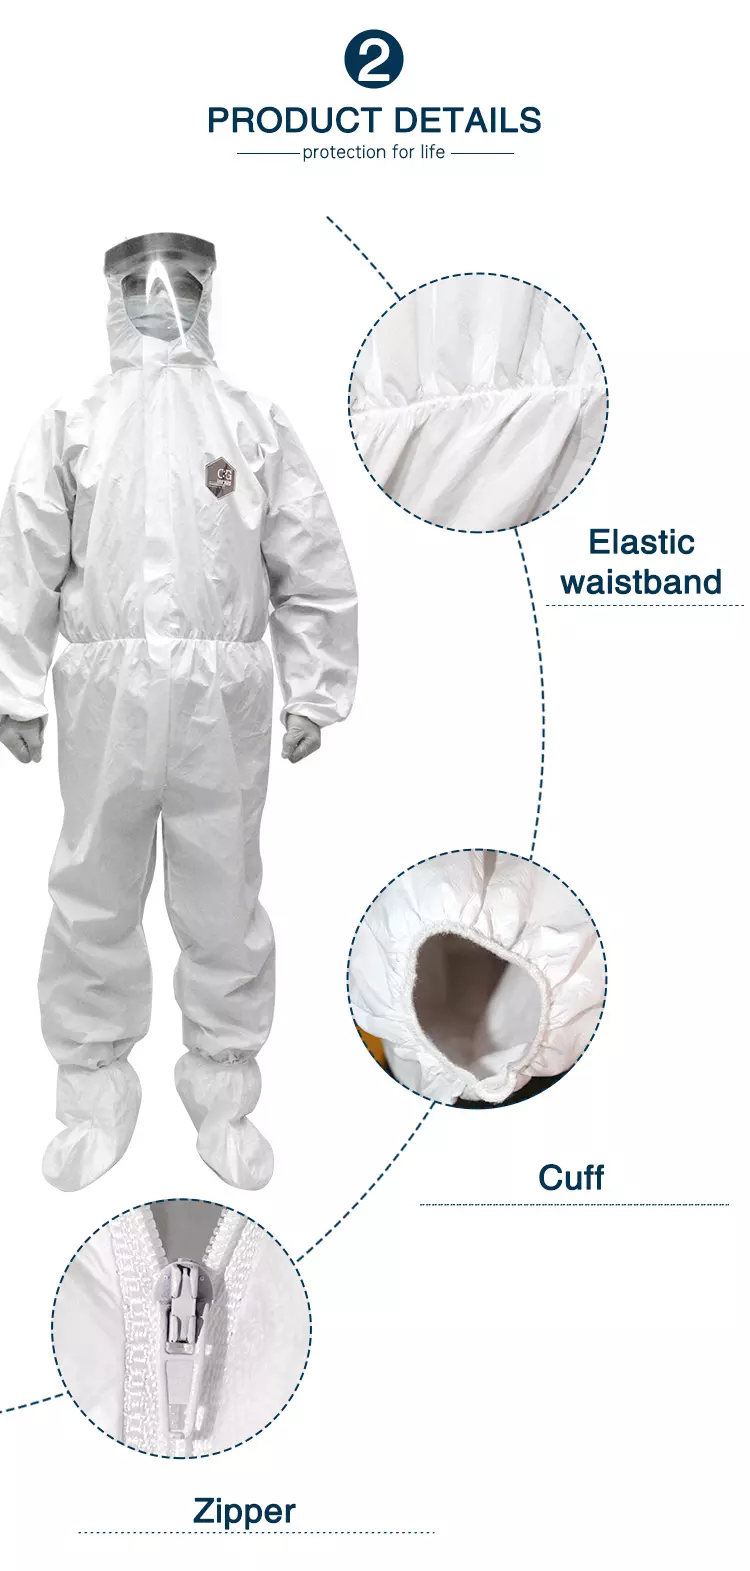 CG500B Disposable <a href=/ppc/ target=_blank class=infotextkey>Protective clothing</a>